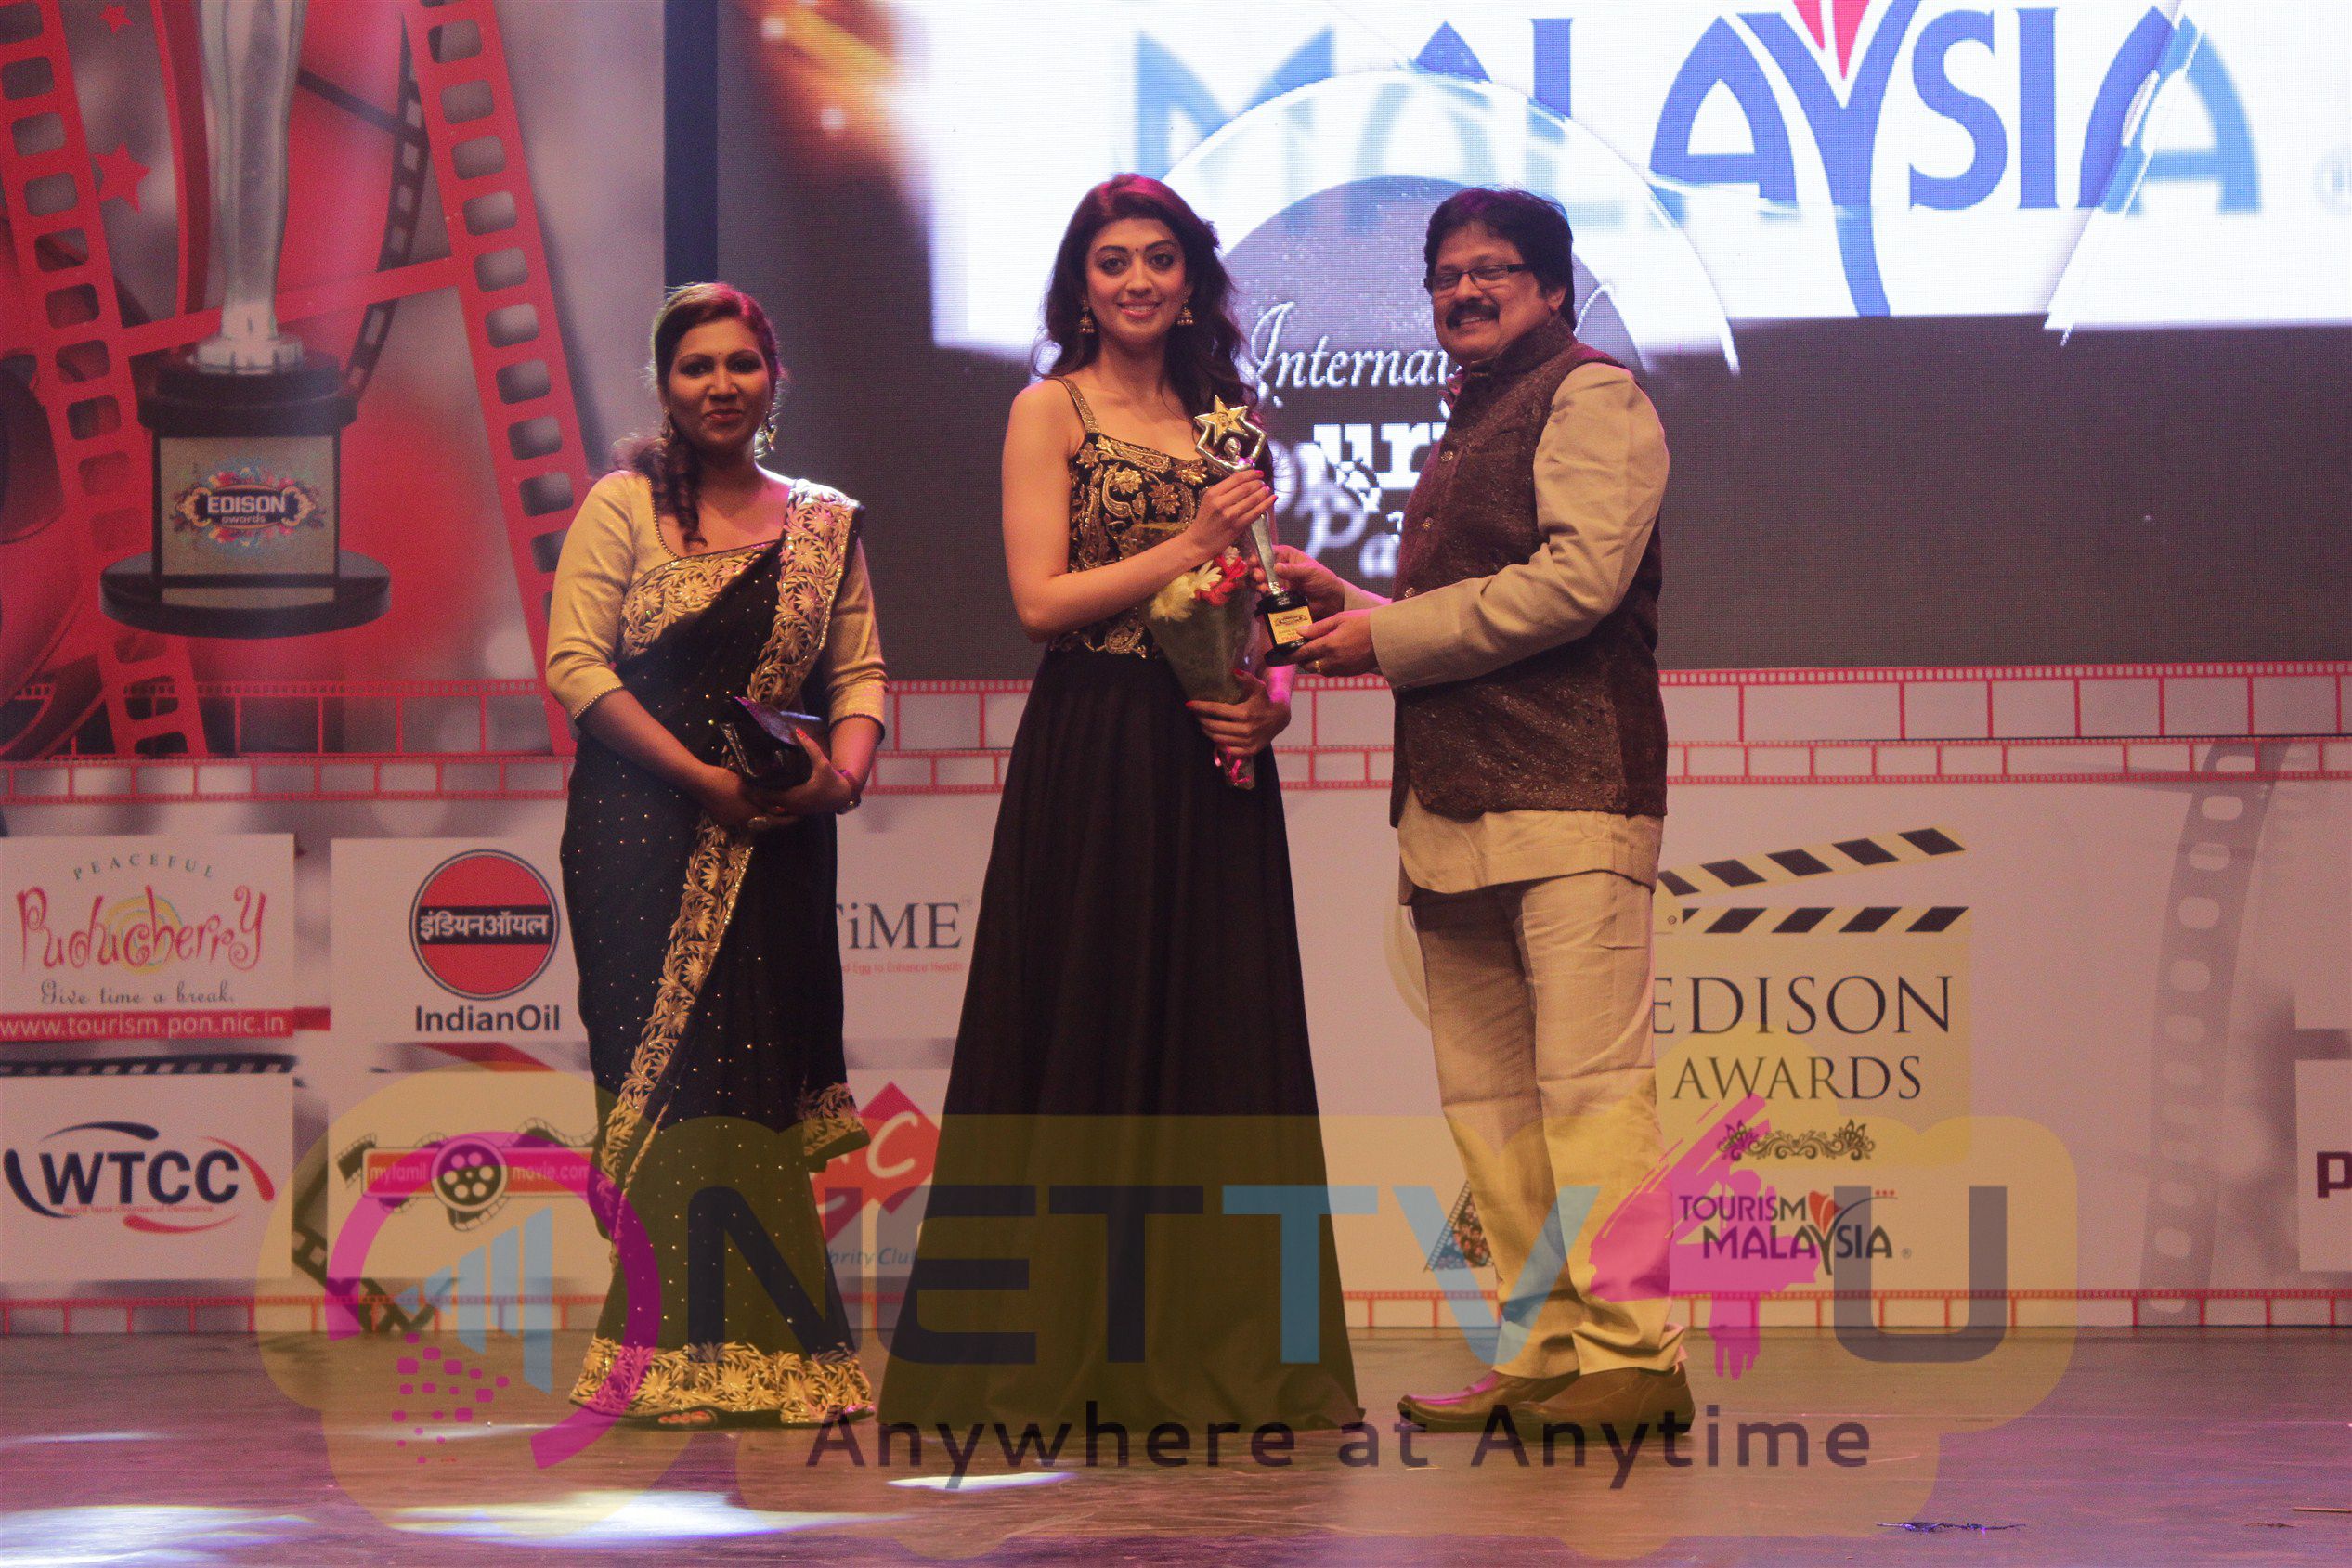 High Quality Pictures Of Edison Awards Tamil Gallery